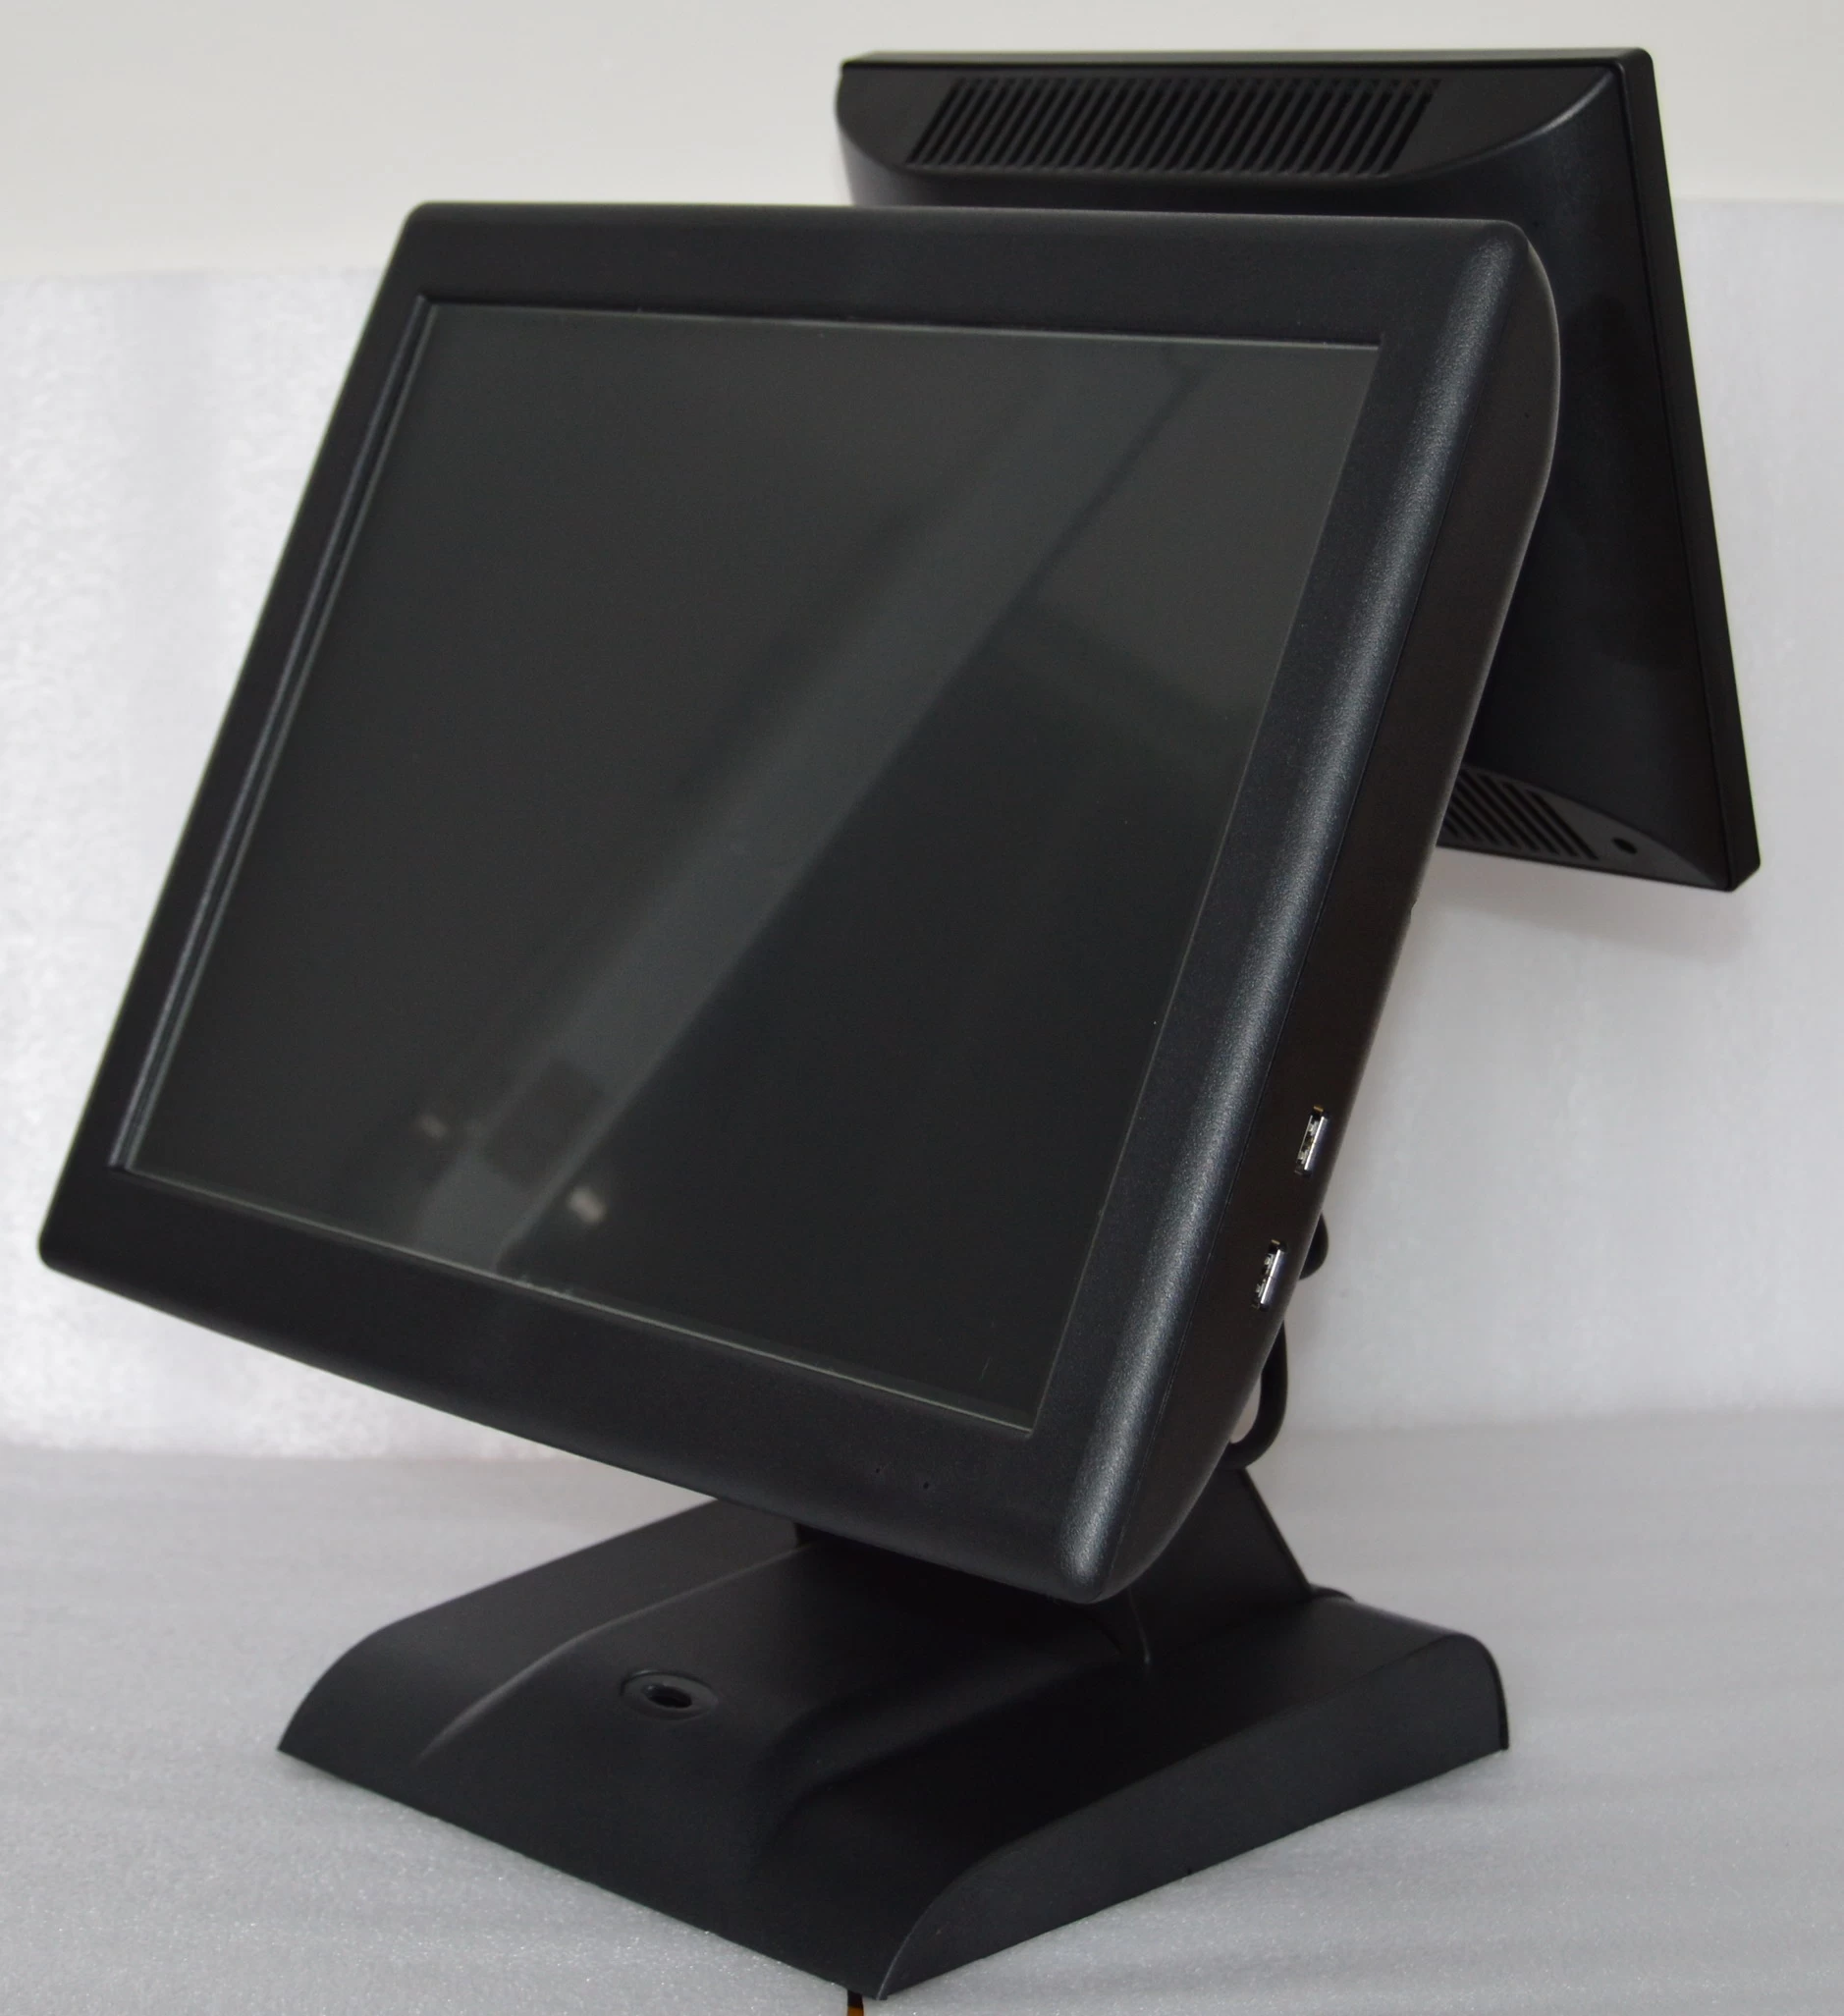 2016 restaurant 15 inch all in one pos touch terminal